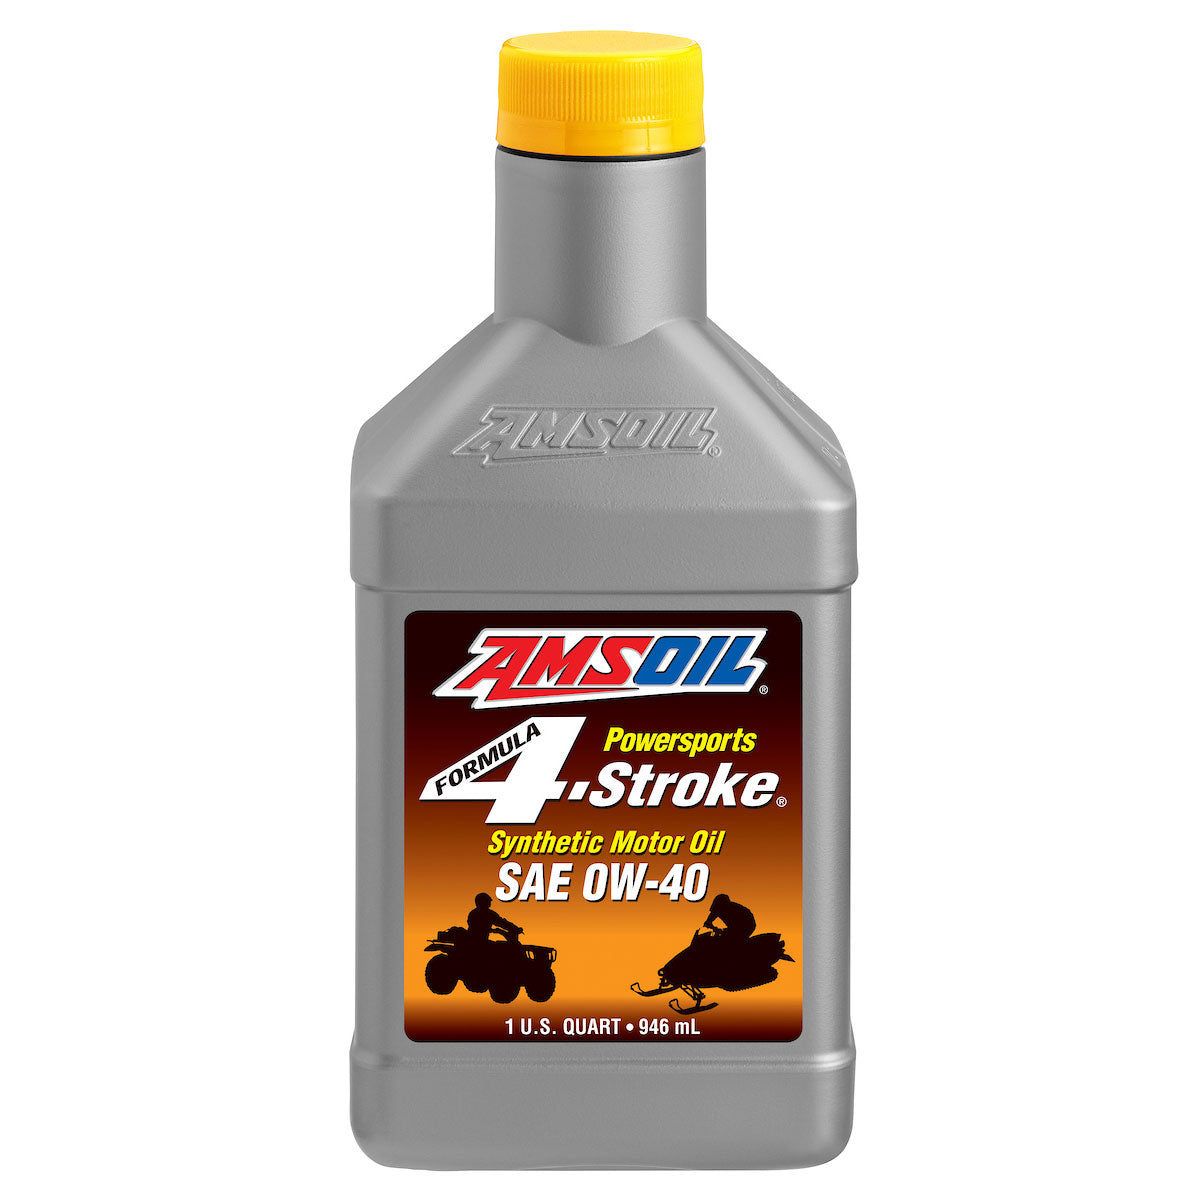 XAO AFFQT | 4-STROKE POWERSPORTS 0W40 SYNTHETIC  | 1 US QUART